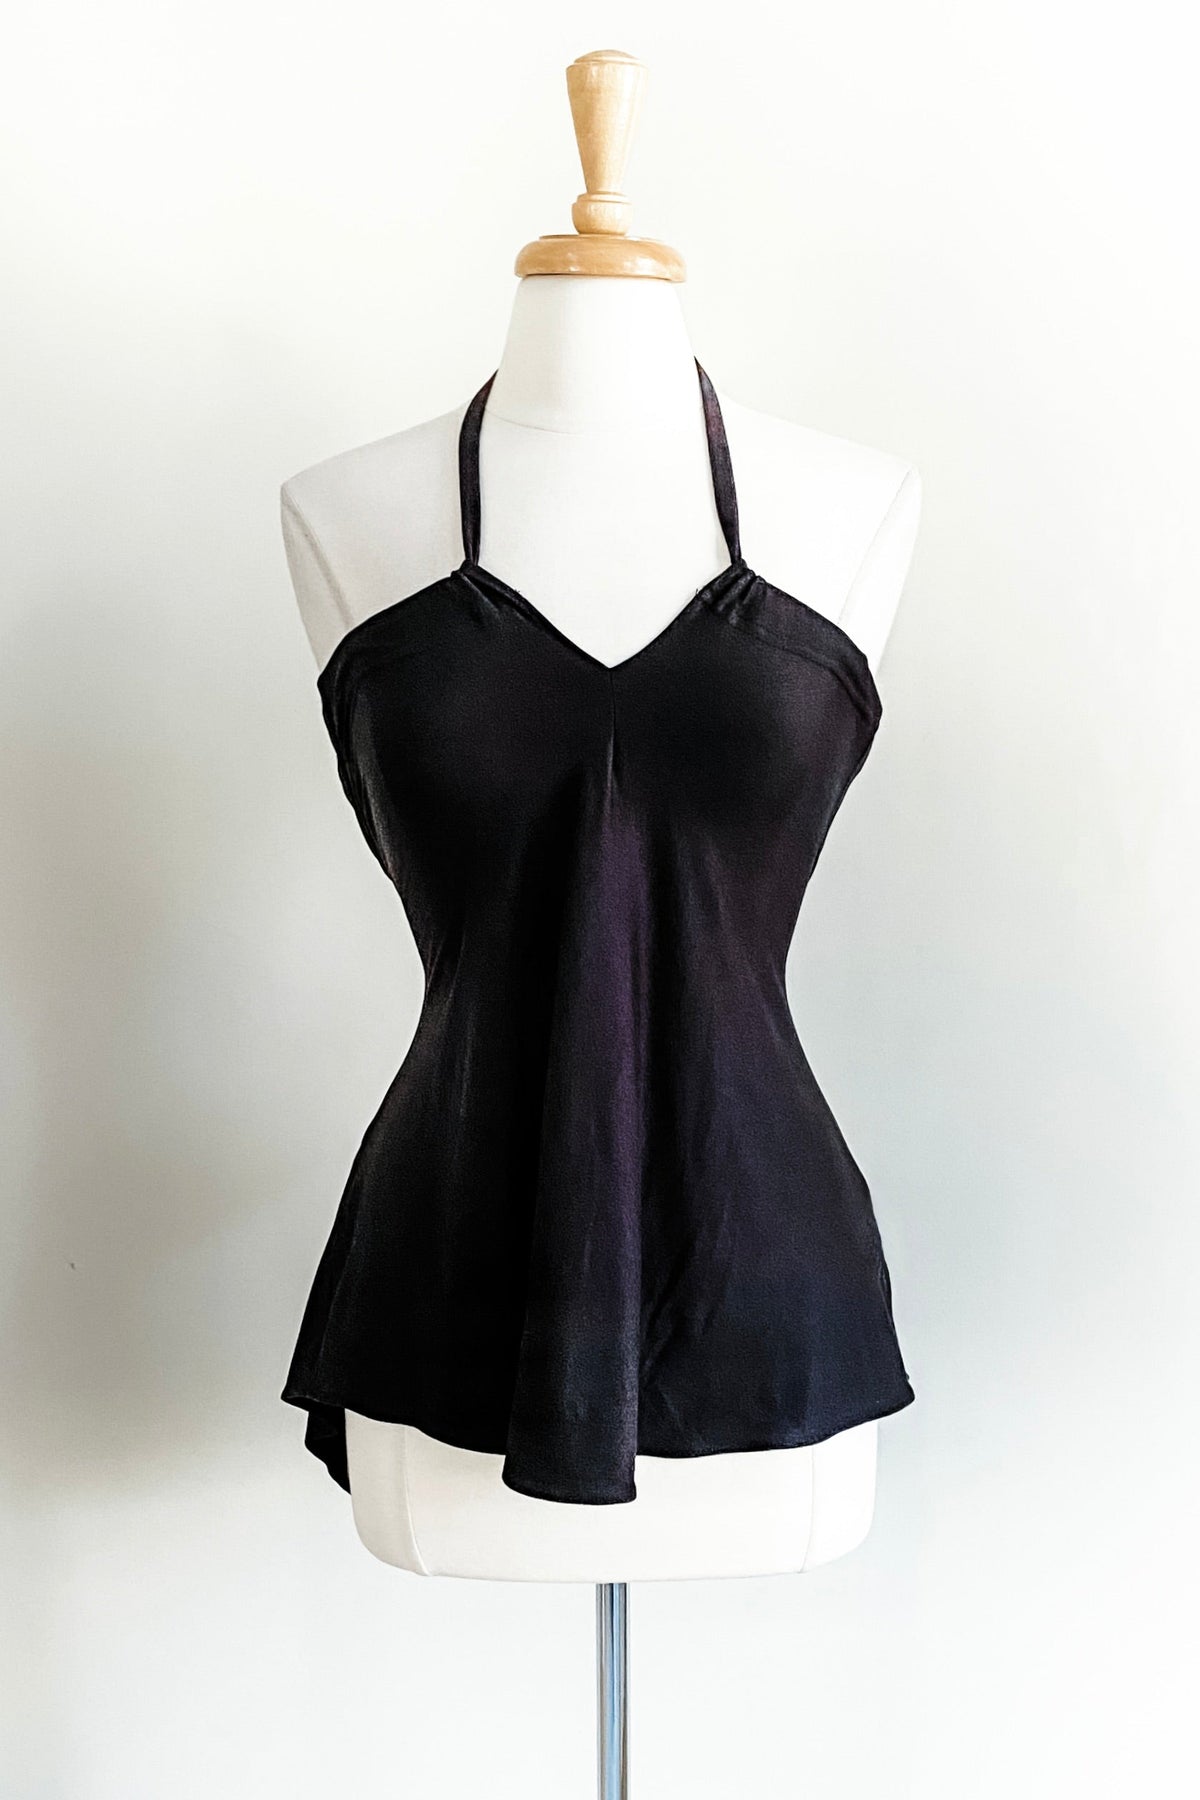 Diane Kroe Evermore Top (Black) - The Classic Capsule Collection